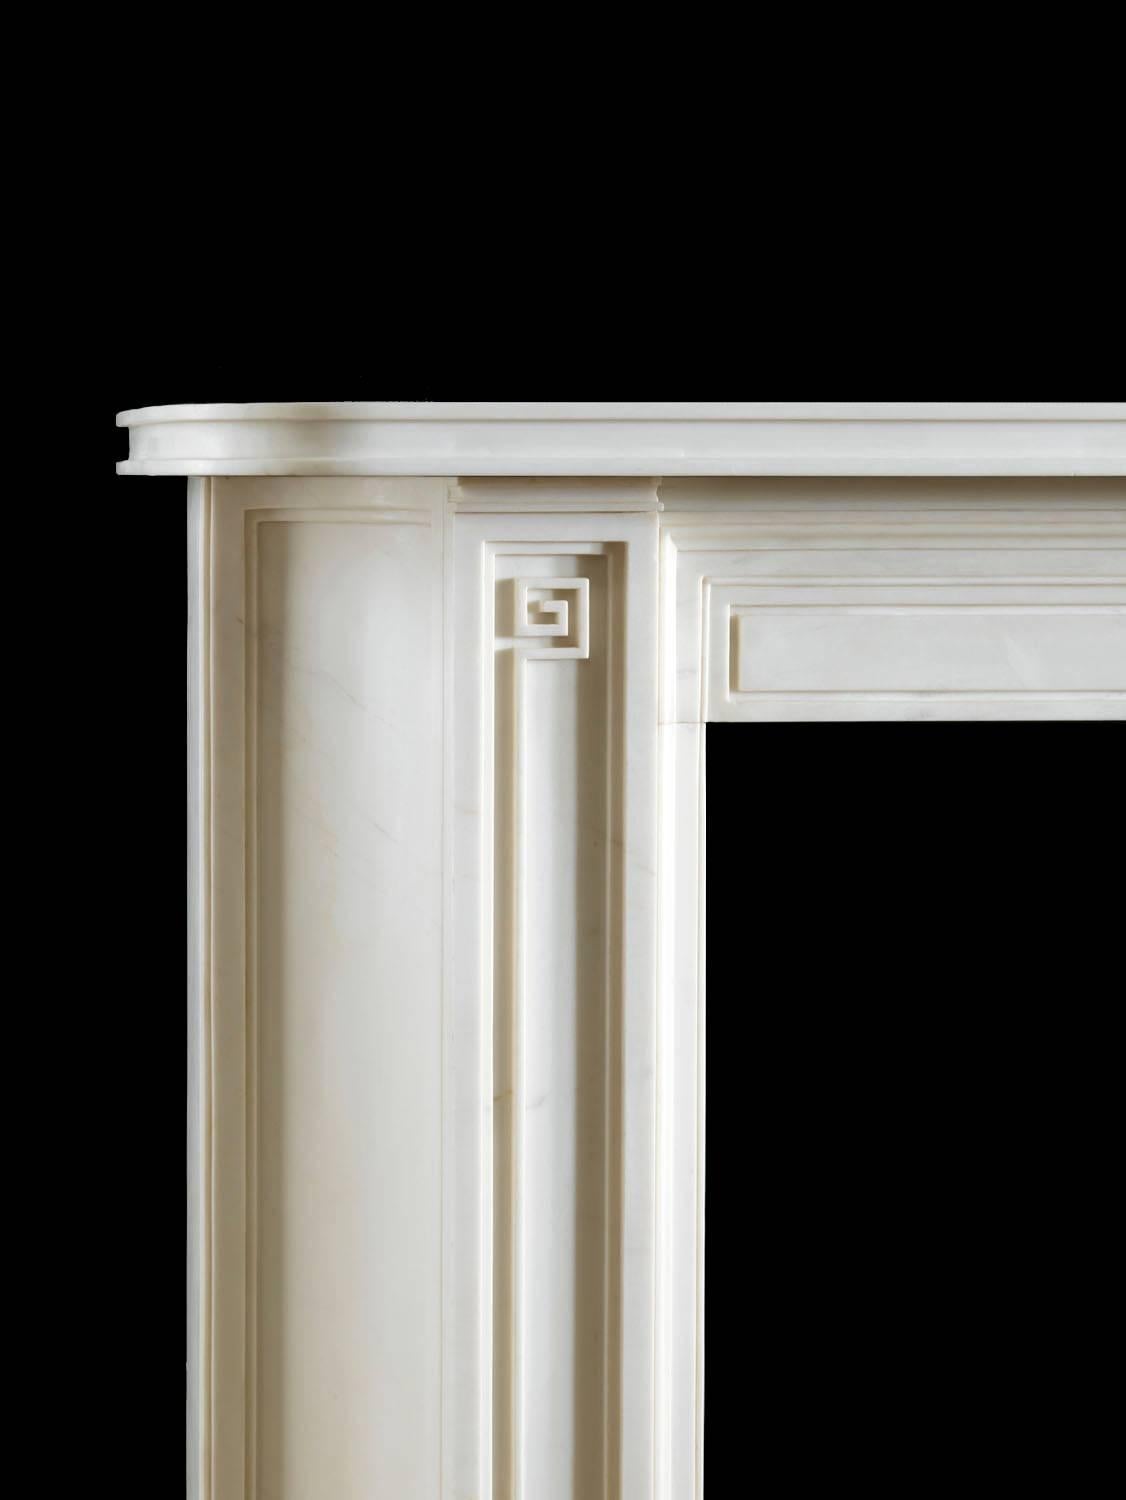 The Soane Pattern IV exemplifies Soane's unique ability to re-interpret classical form and produce a design of stunning modernity. The inverted bow to the pilasters and stylized Greek Key motif could only have been conceived by Soane. The mantel was